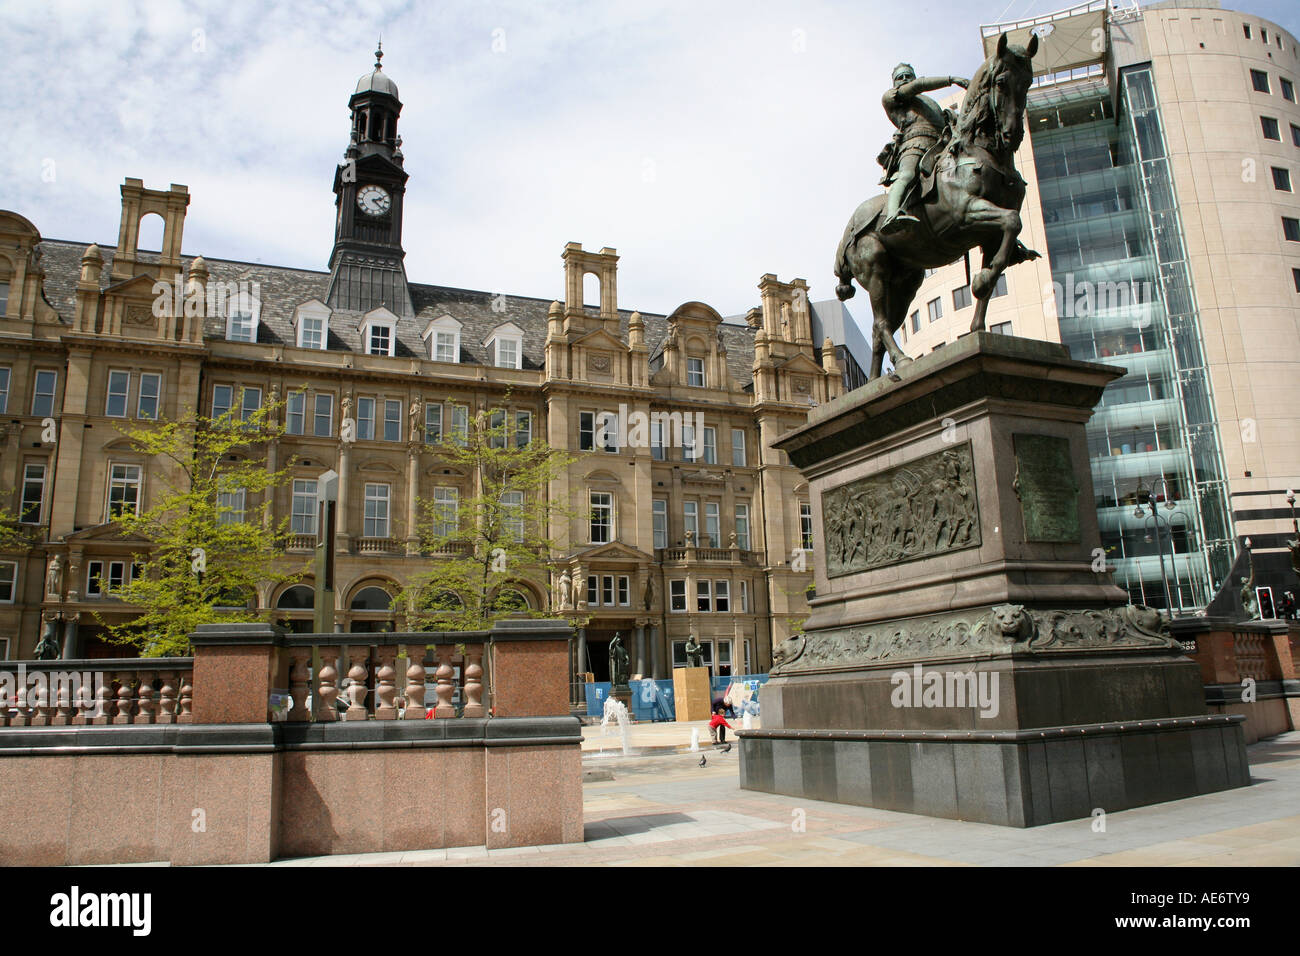 Statue of Edward Prince of Wales the Black Prince in City Square Leeds Stock Photo